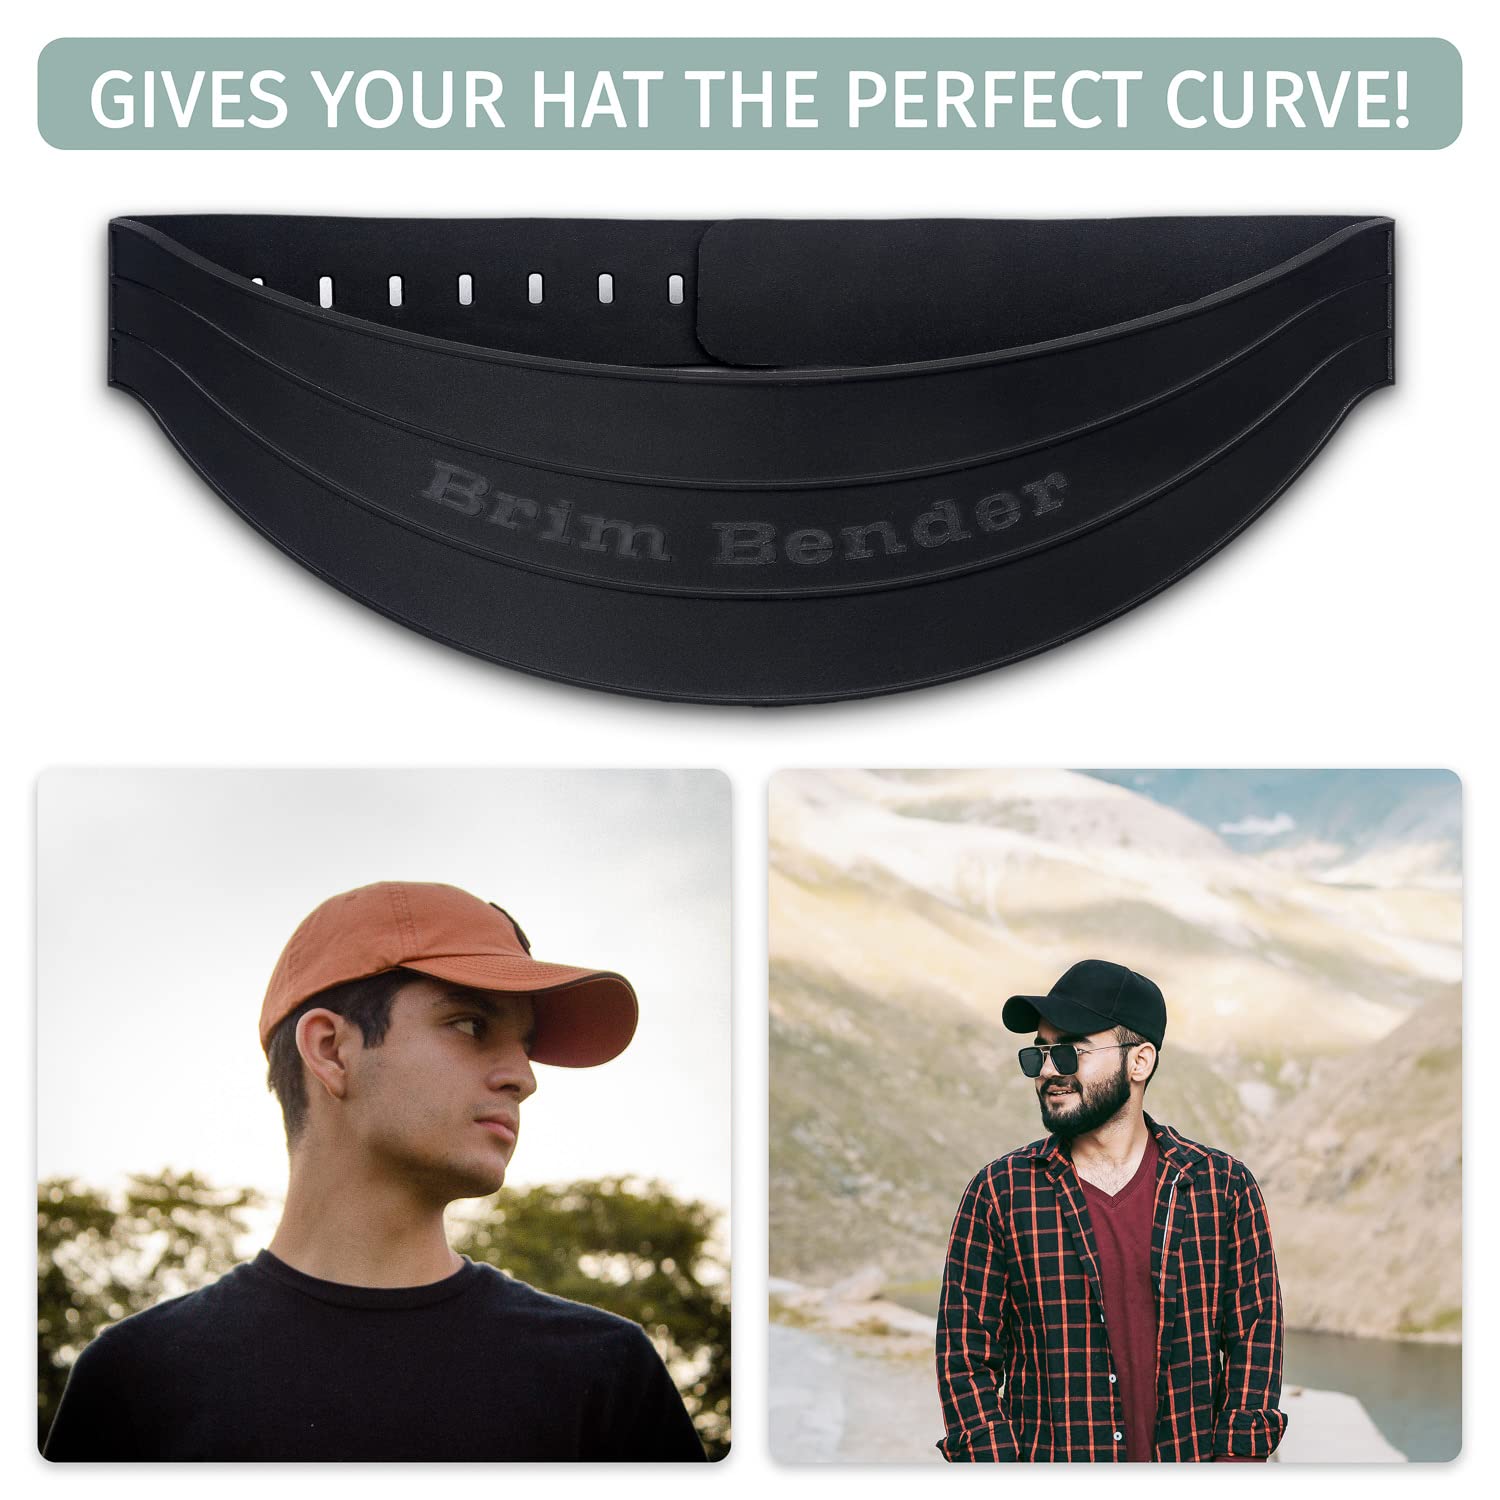 Hat Brim Bender - Hat Bill Bender Easy Snap-on Hat Curving Band, No Steaming Required - Perfect Multiple Size Hat Shaper Design - Black One Size Fits All - Plastic Reusable Shaping Bands